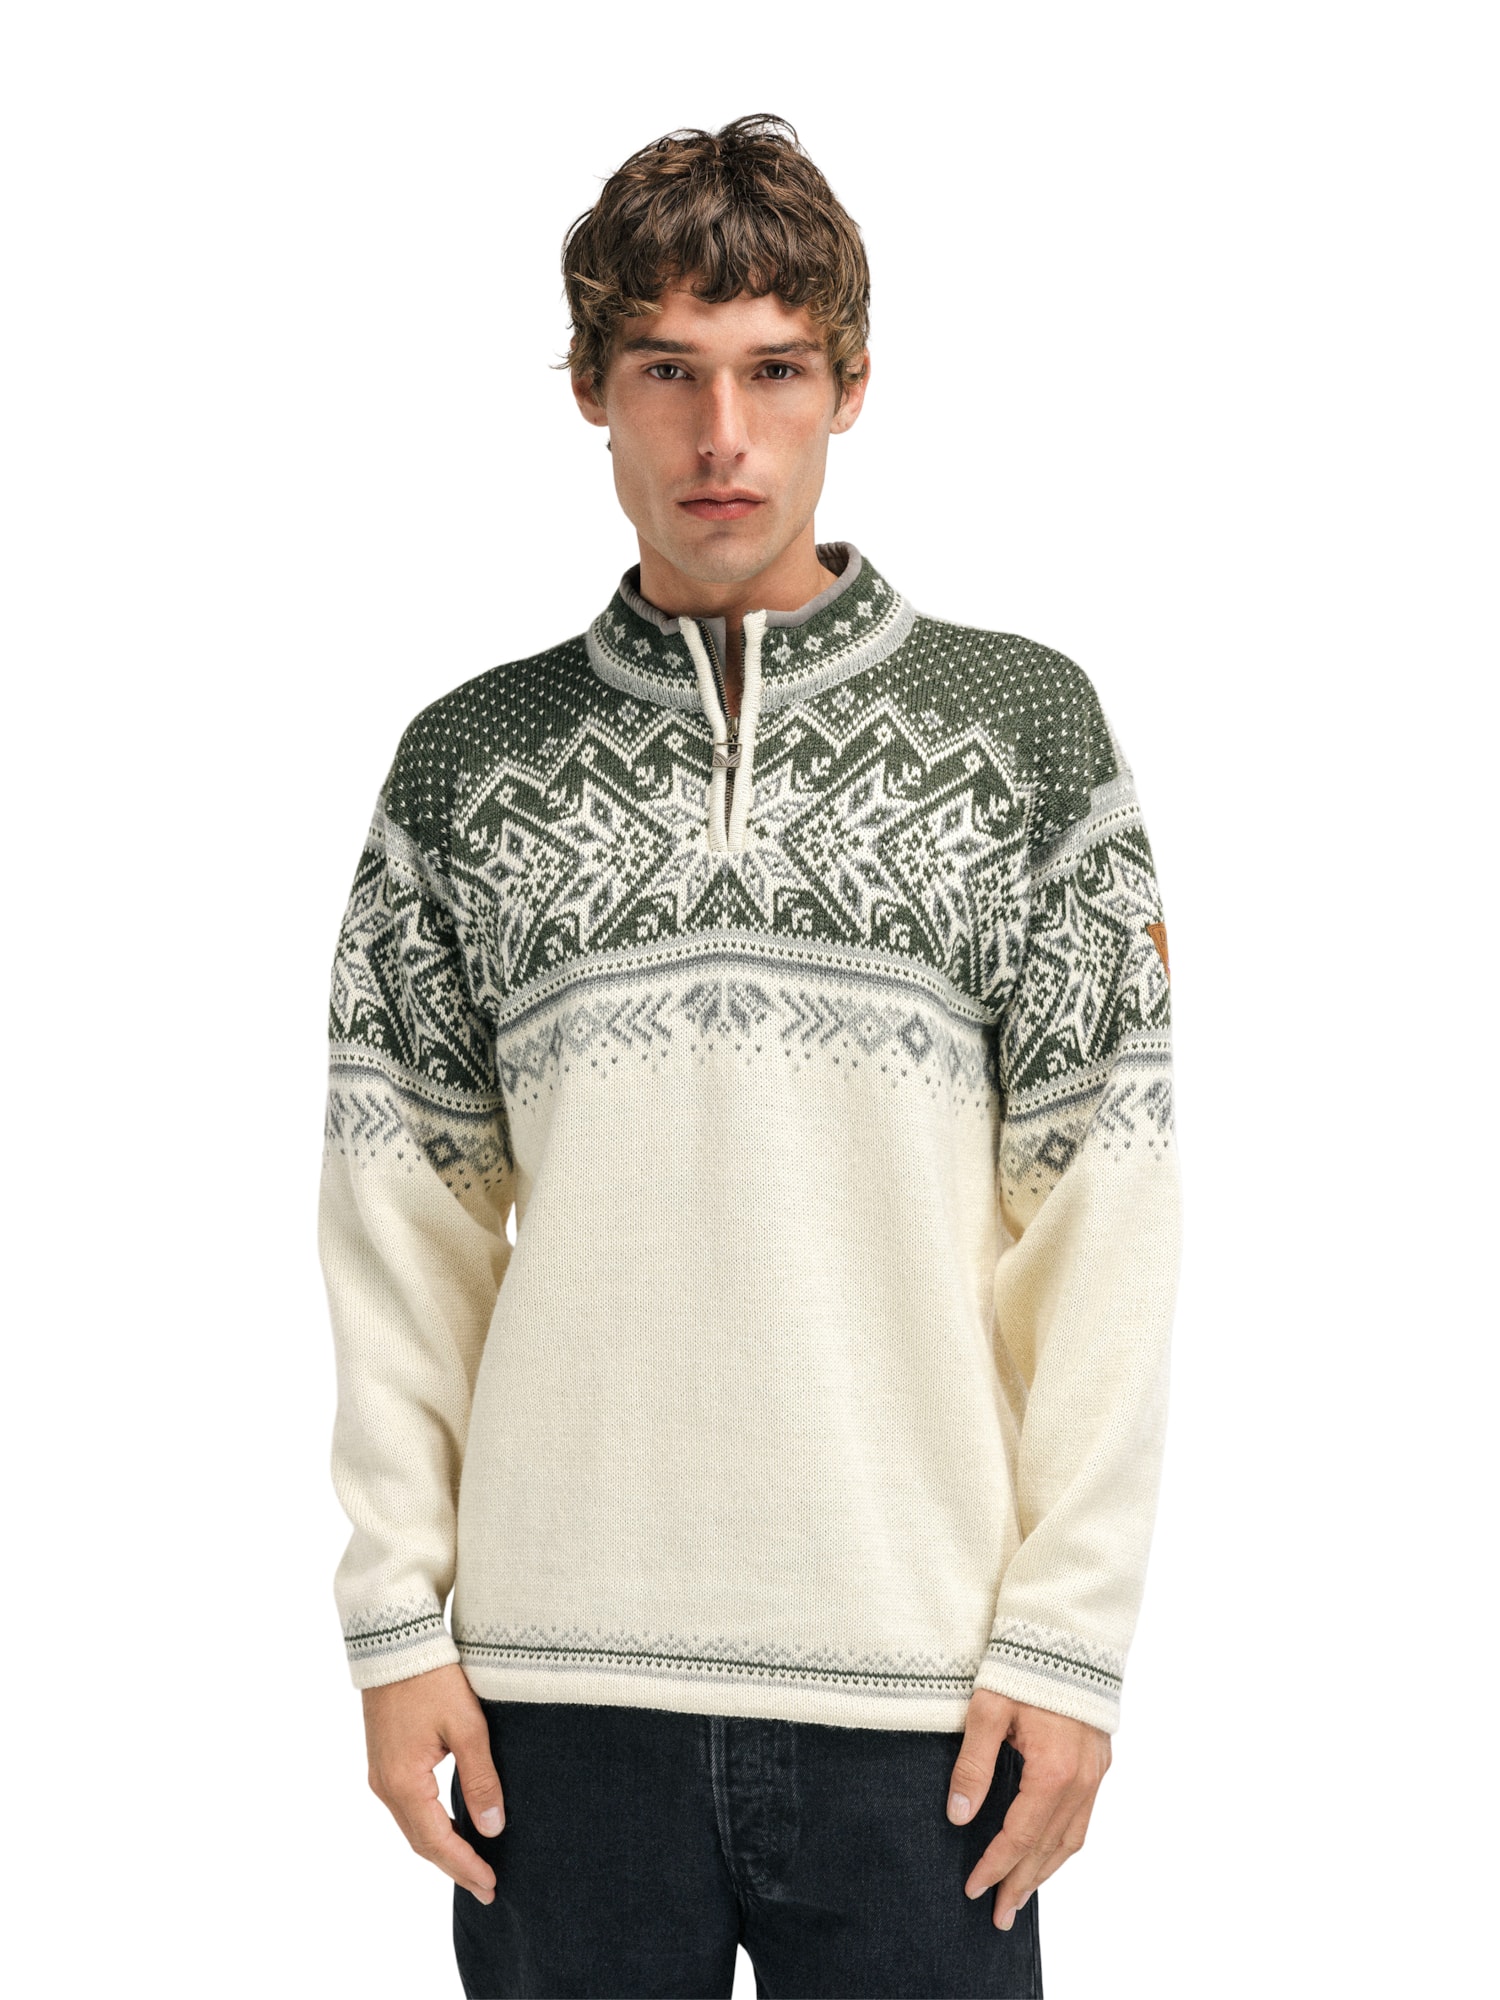 Vail Sweater - Men - Offwhite/Dark Green - Dale of Norway - Dale of Norway